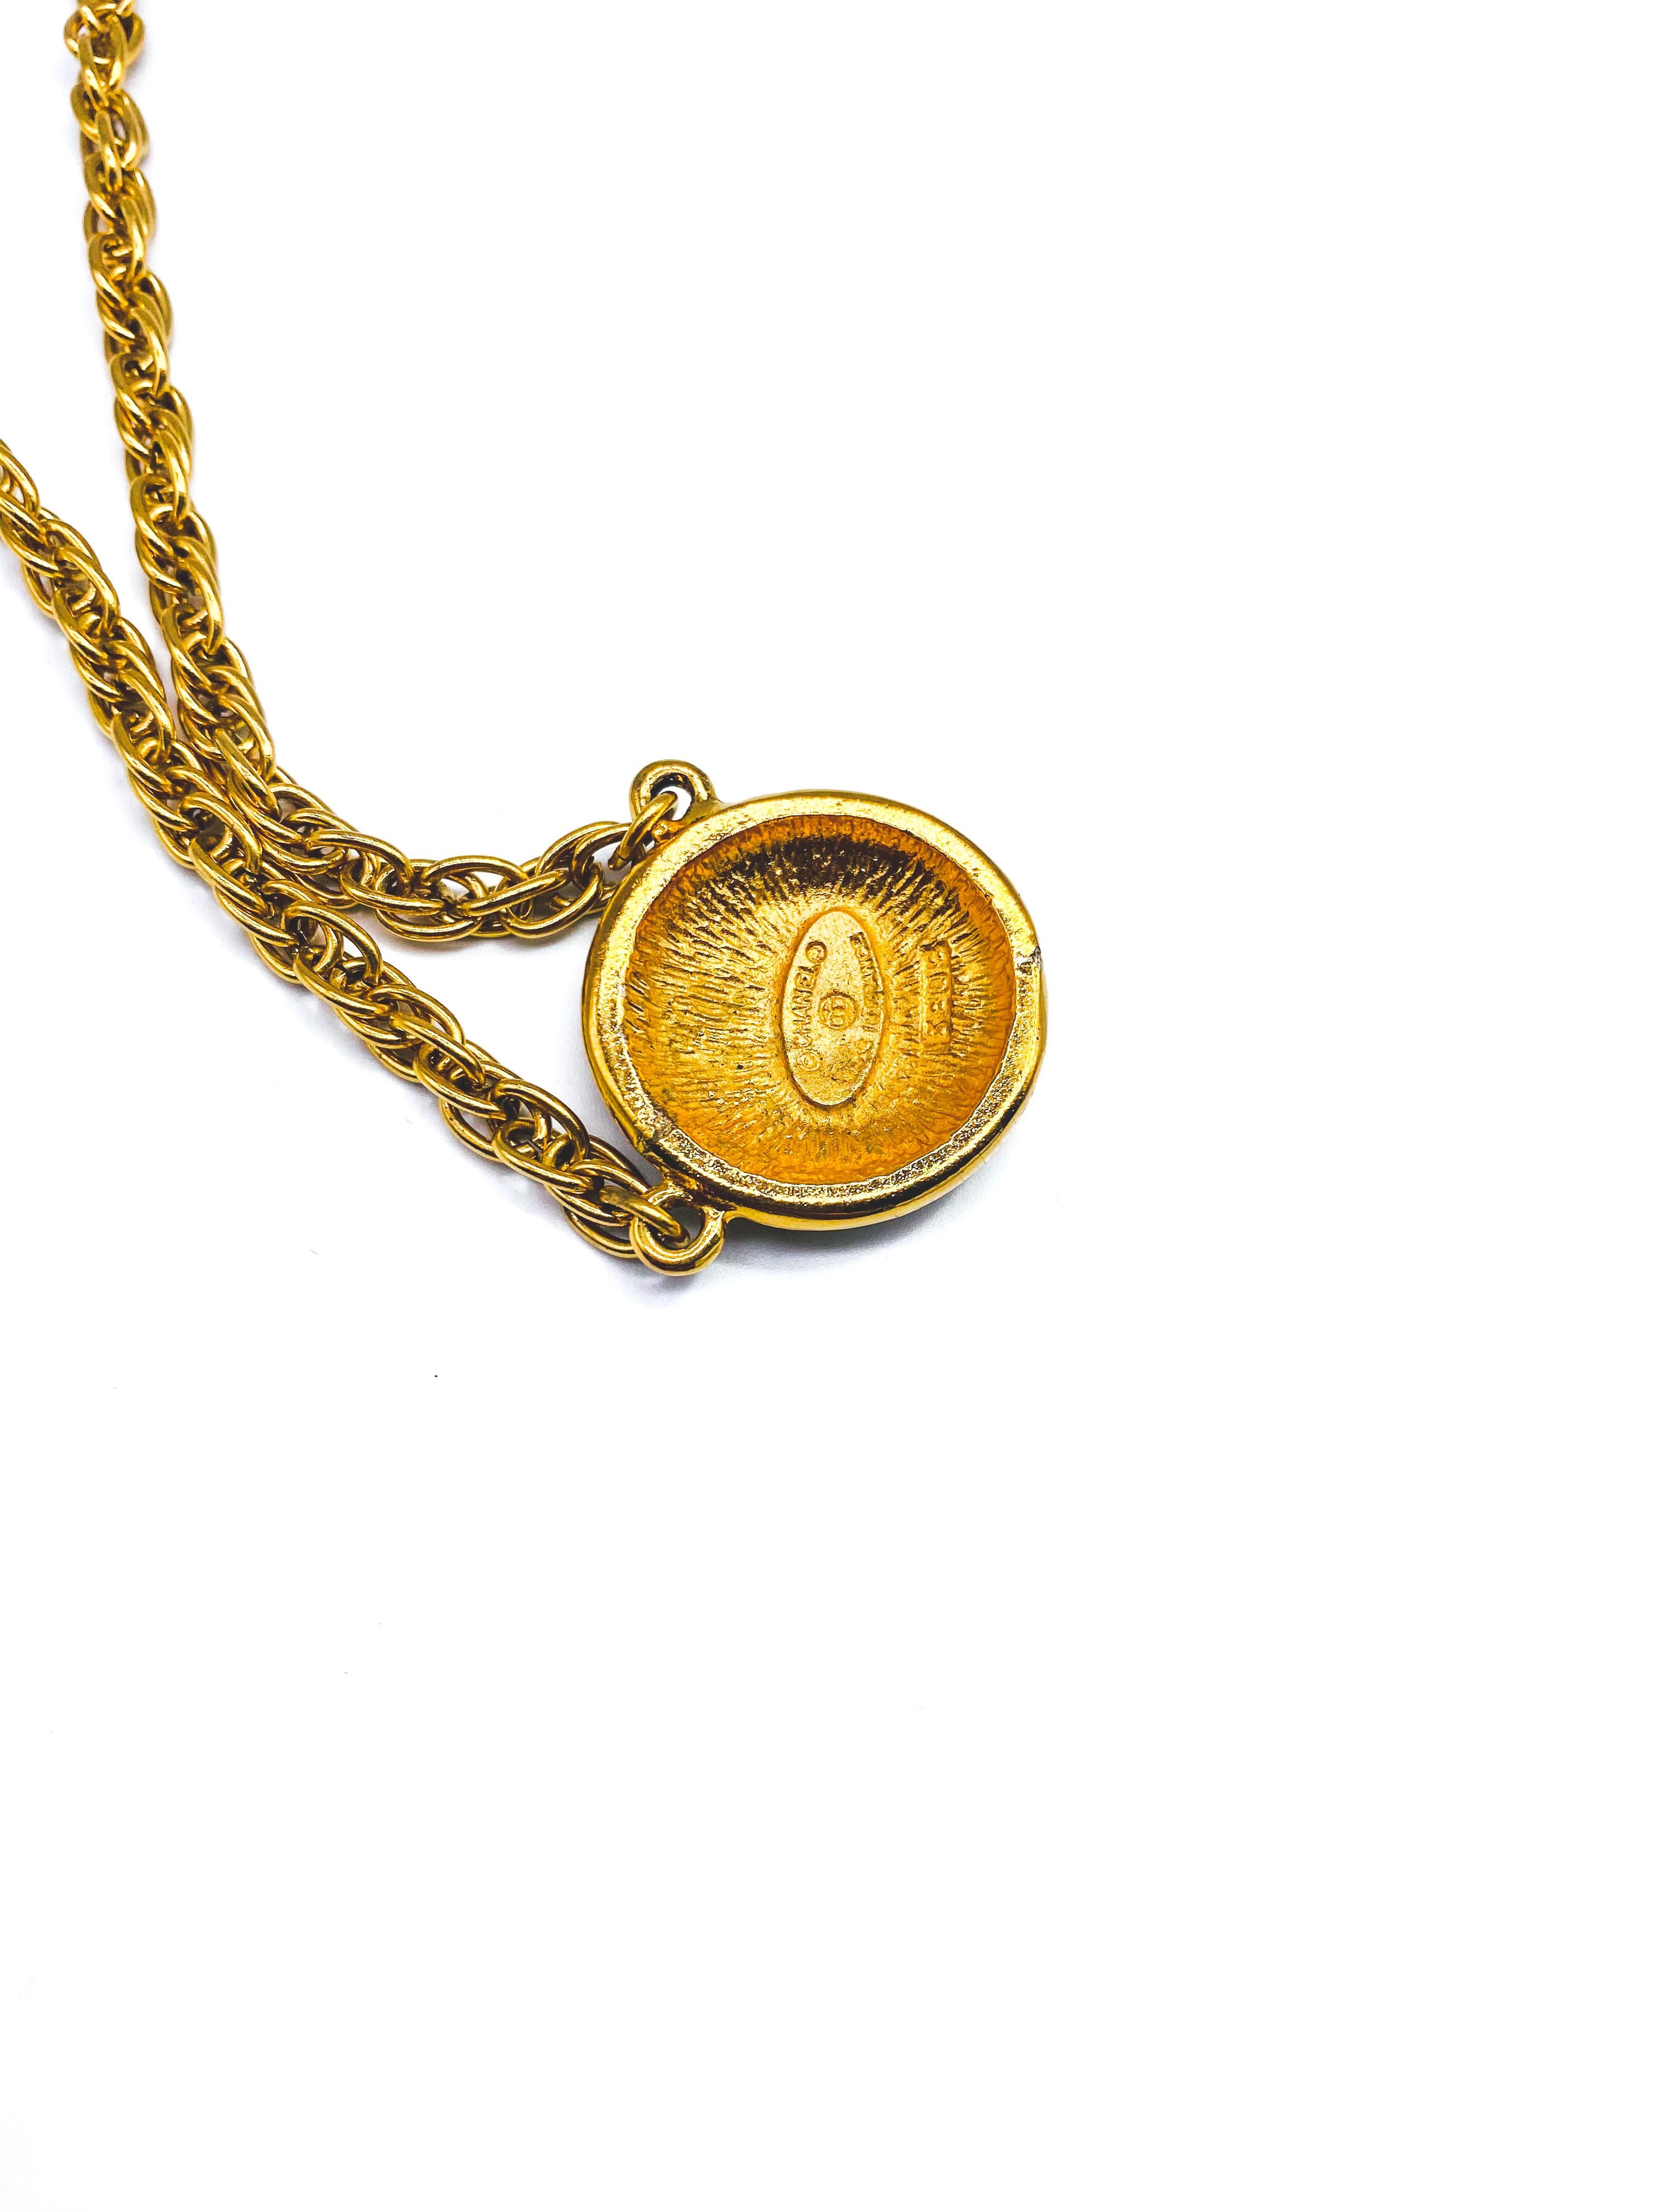  CHANEL Necklace Vintage 1980s

An iconic statement piece from the chanel 80s archive 

Detail
-Made in France in the early 80s
-Crafted from high quality gold plated metal
-Choker length rope chain with spring ring clasp
-Circular pendant featuring